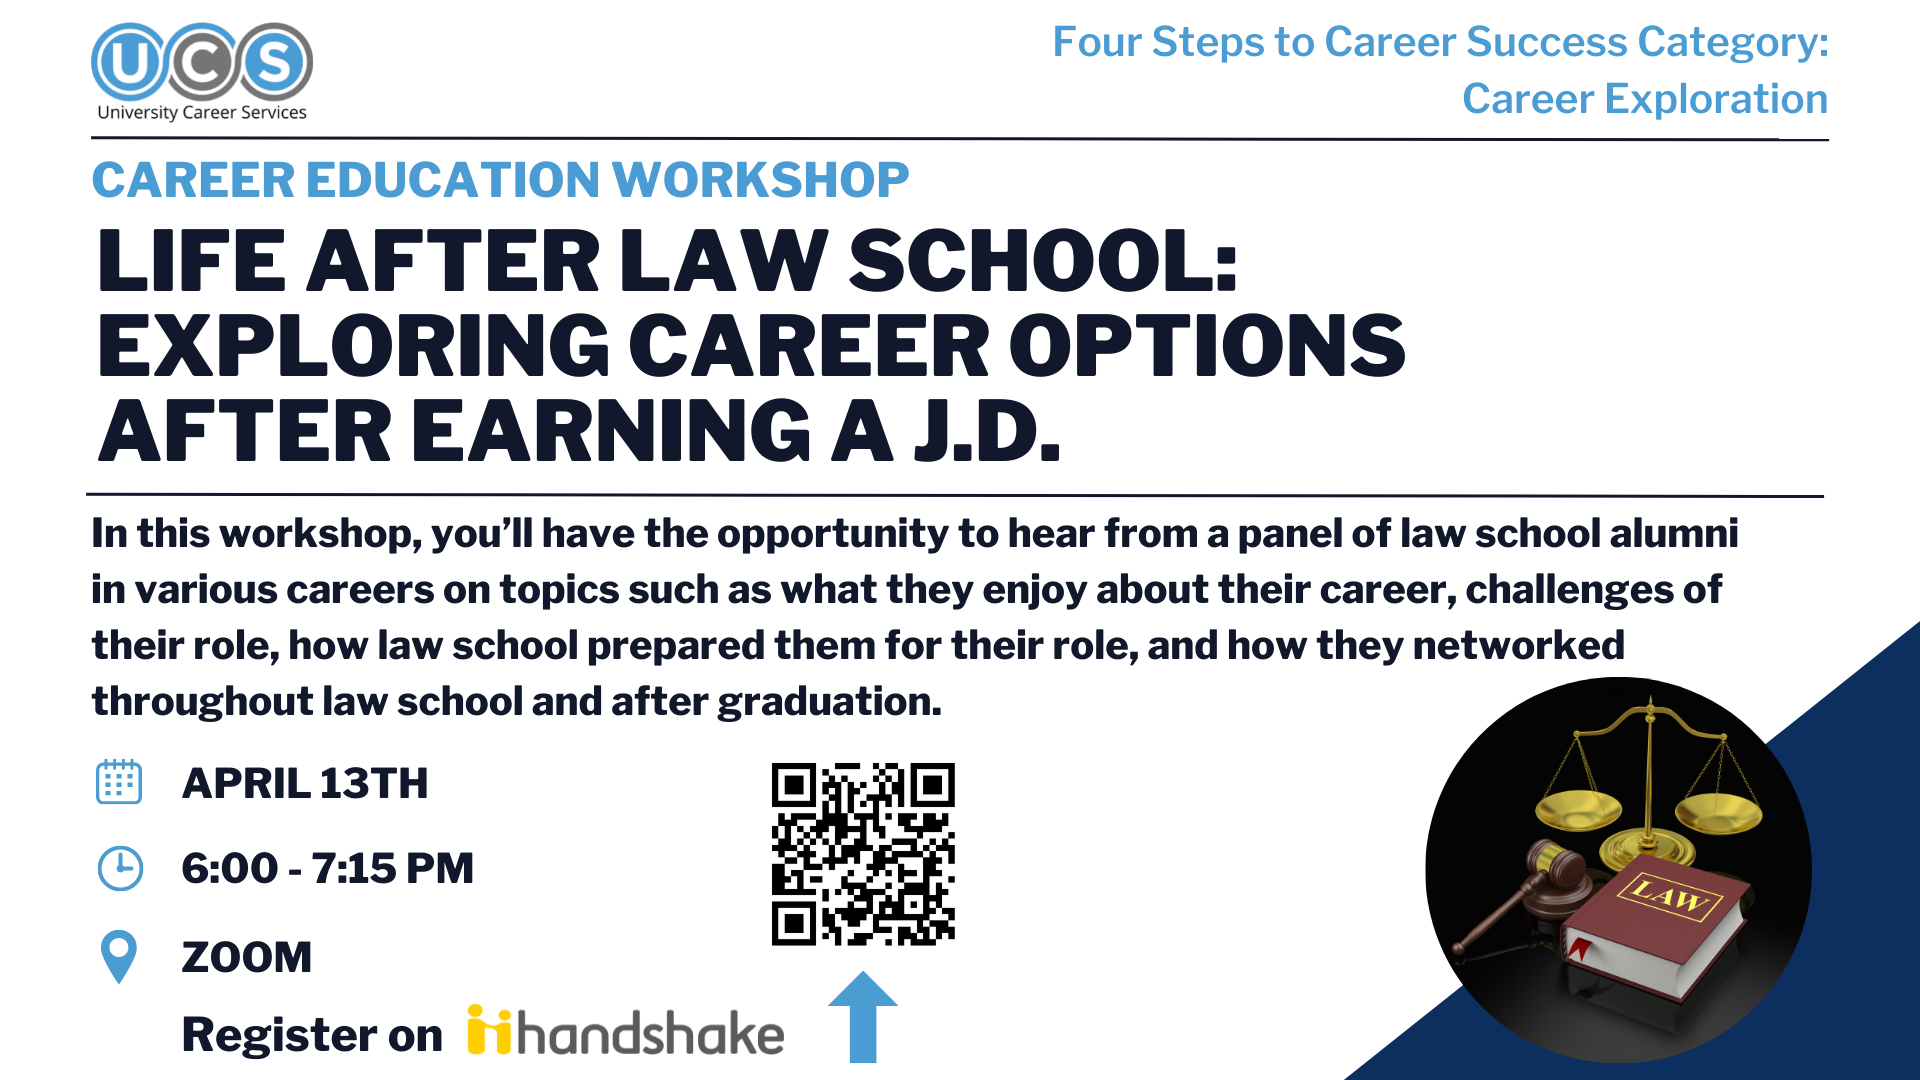 In this workshop, you’ll have the opportunity to hear from a panel of law school alumni in various careers on topics such as what they enjoy about their career, challenges of their role, how law school prepared them for their role, and how they networked 